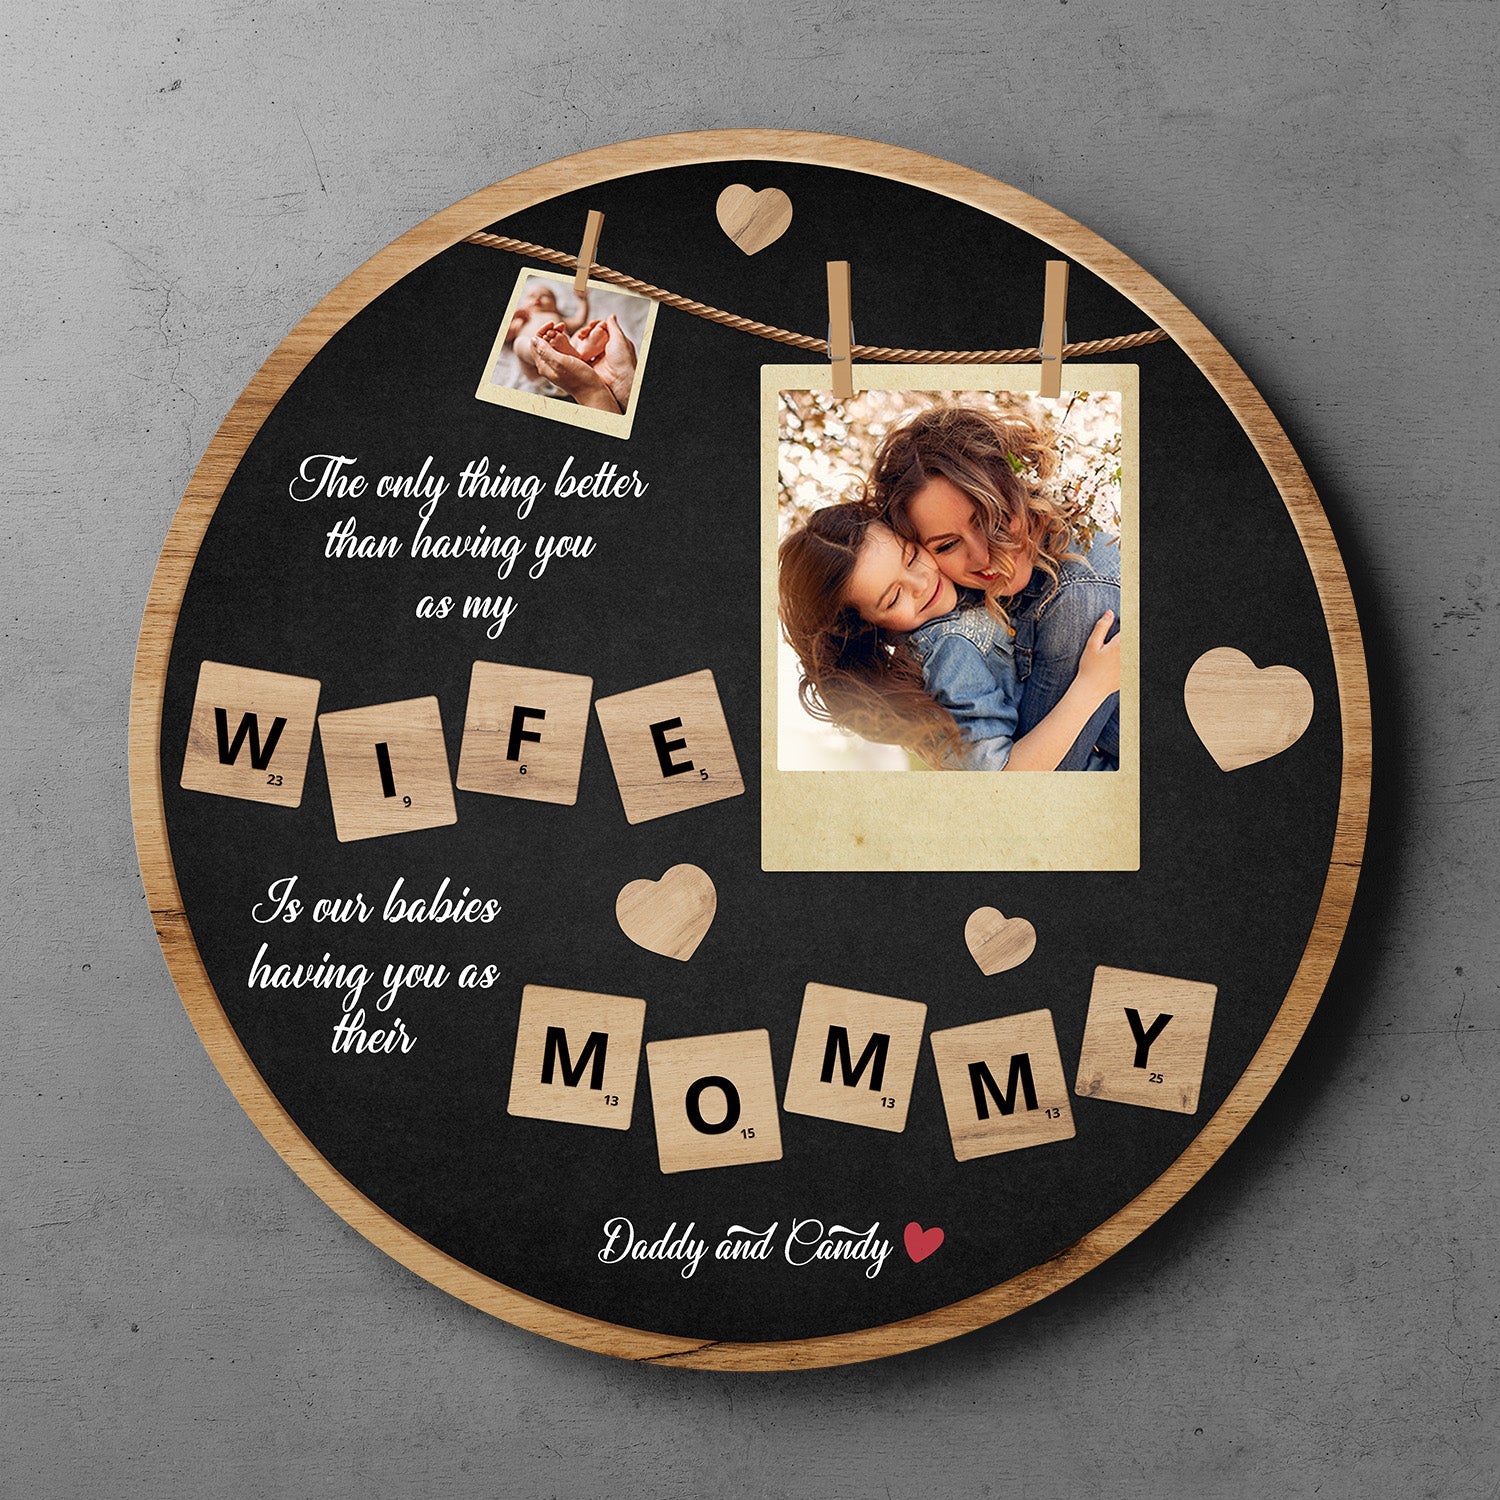 Wife And Mommy Custom Photo Collage, Personalized Name, Round Wood Sign